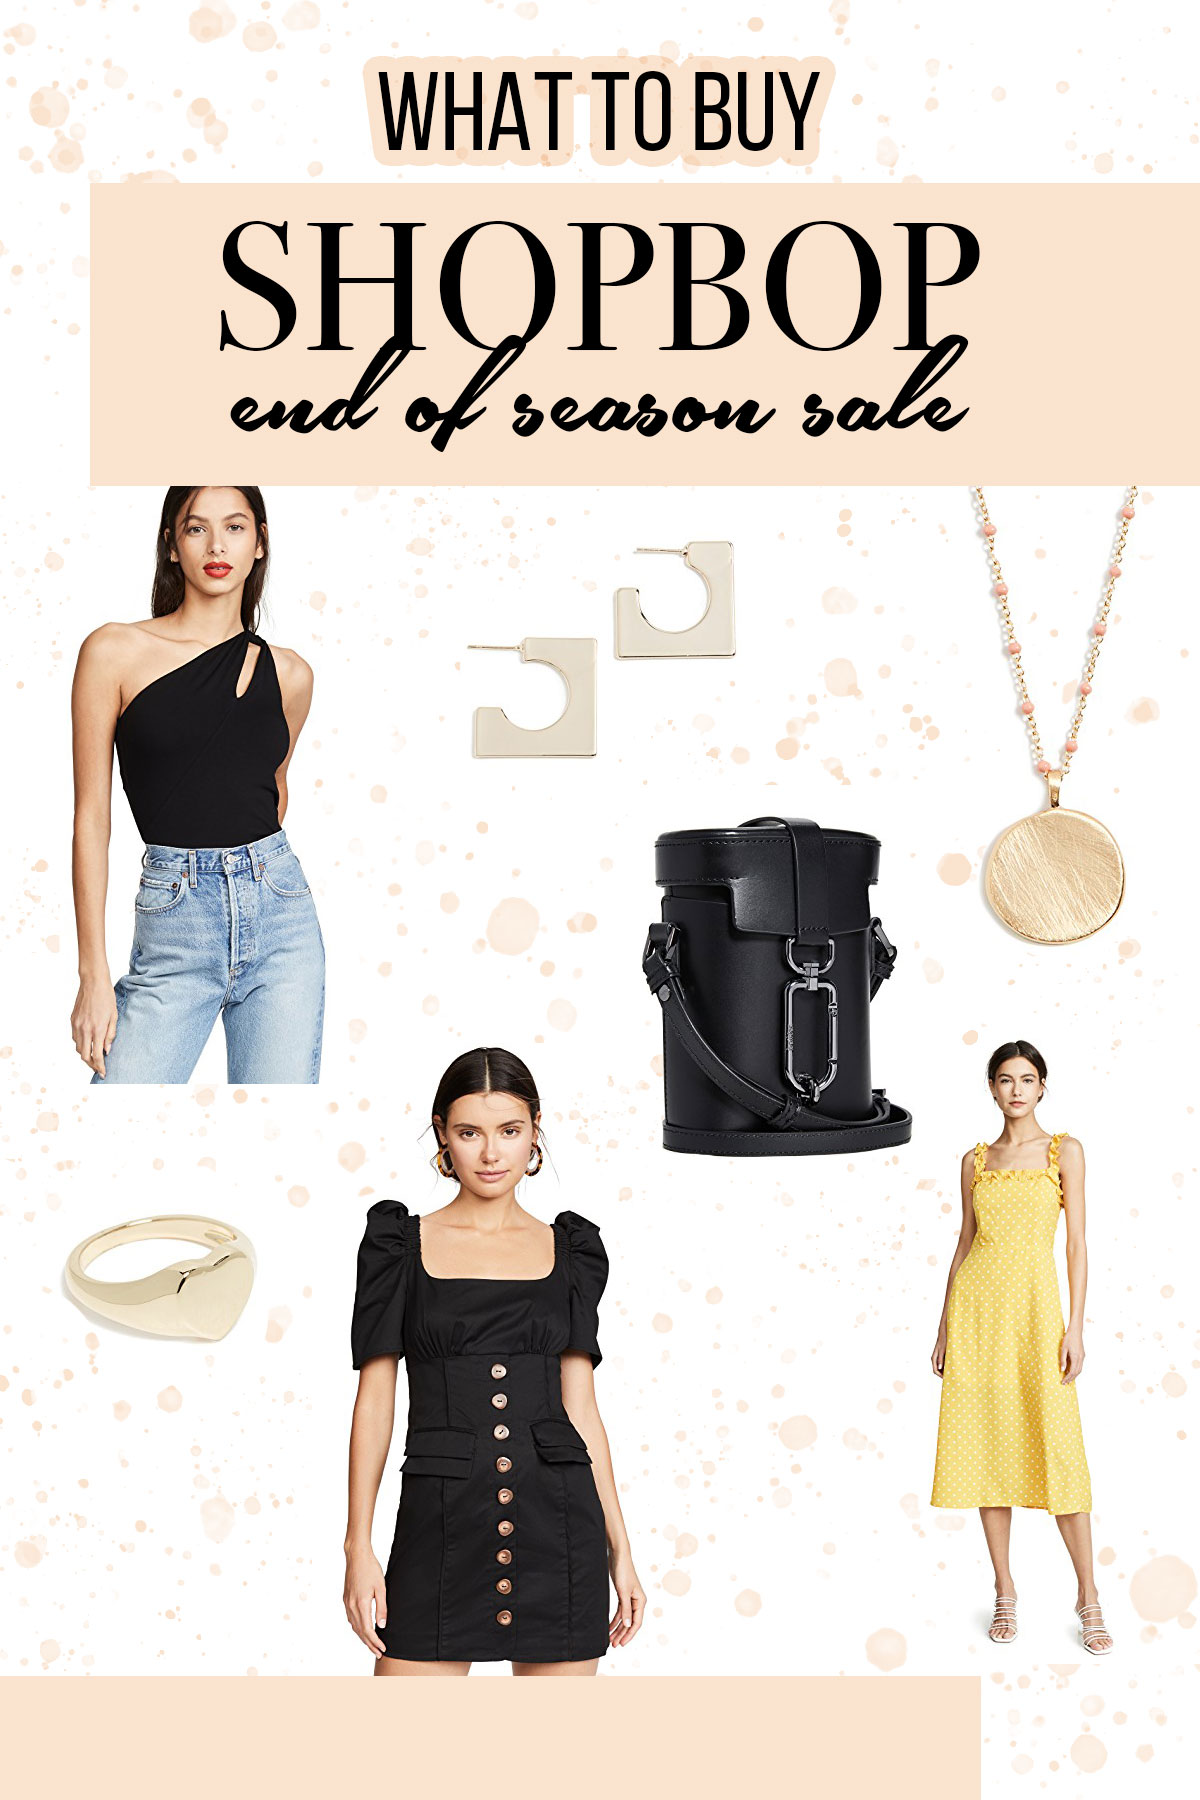 What to Buy From Shopbop End of Season Sale